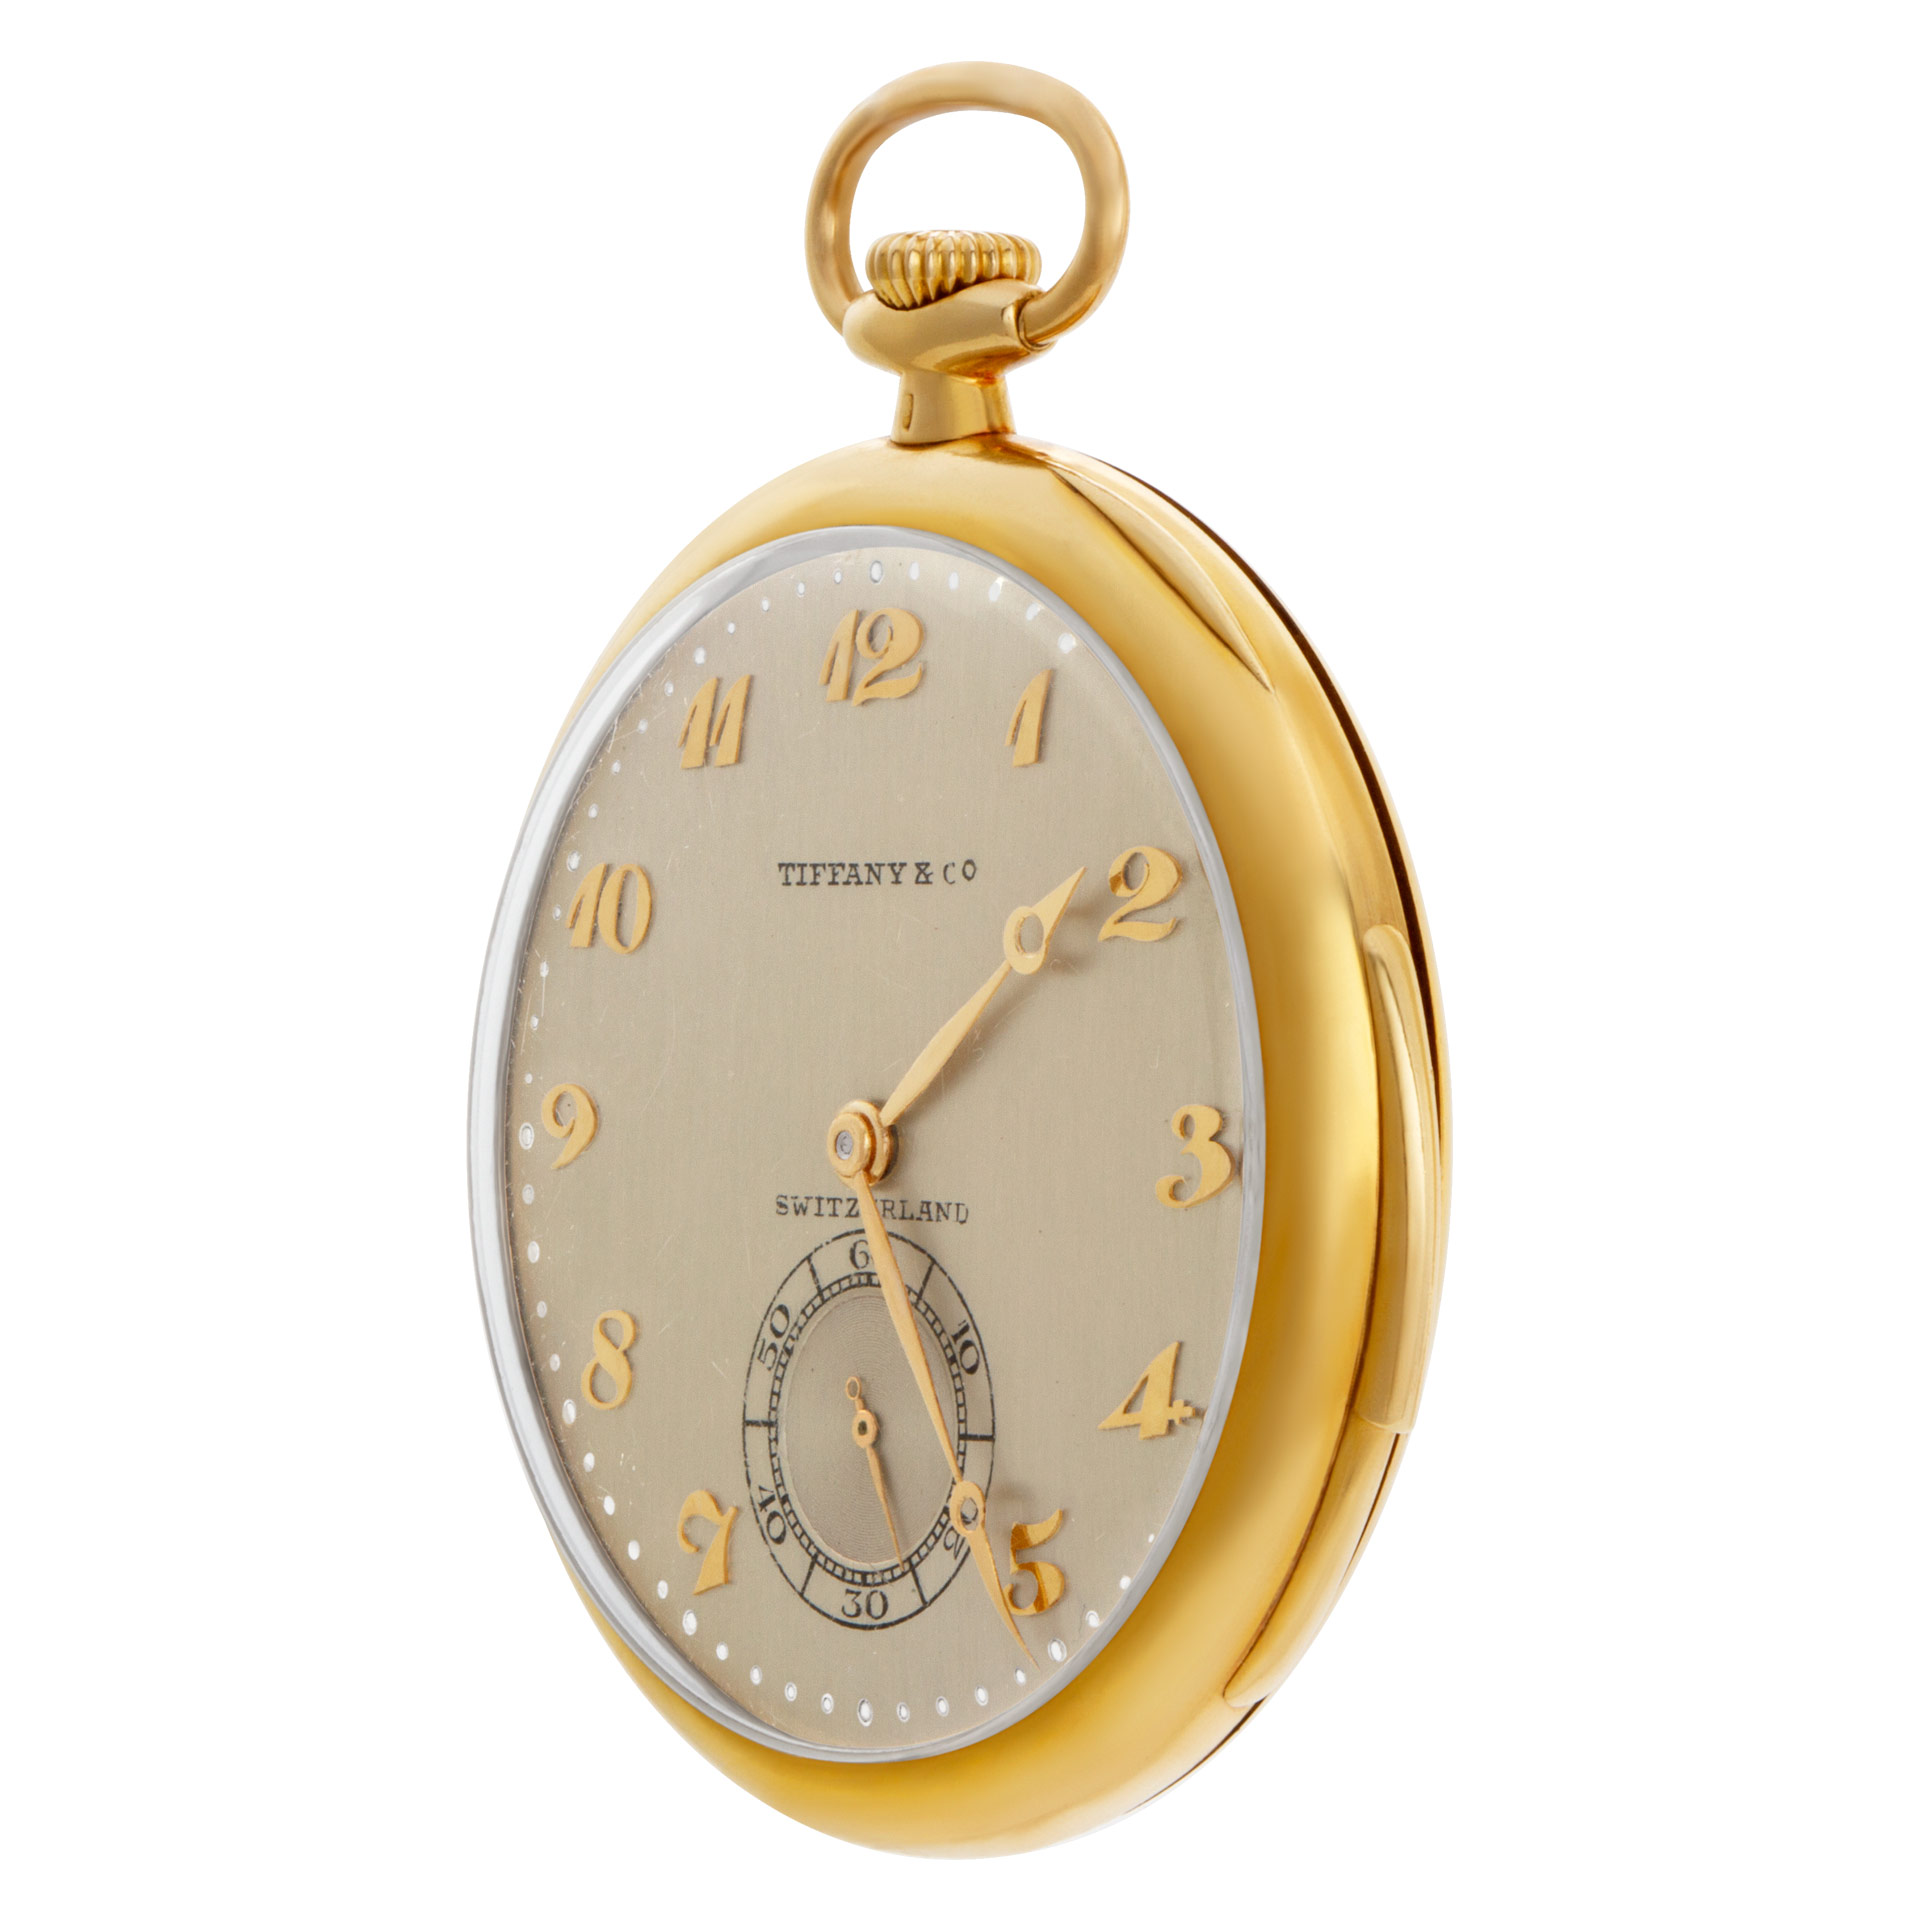 Patek Philippe pocket watch 46mm Minute Repeater image 2